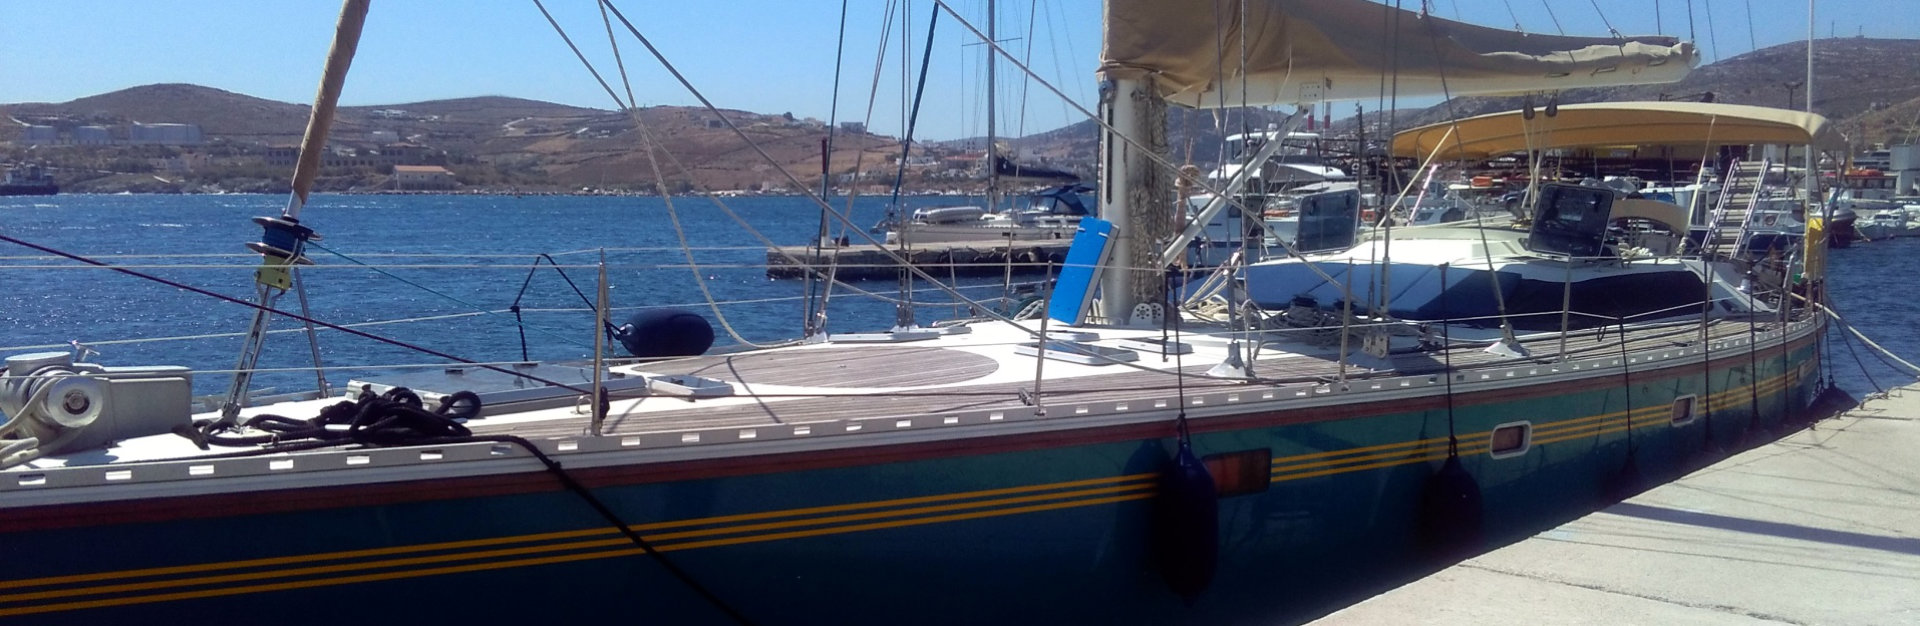 Sailing holiday in Greece